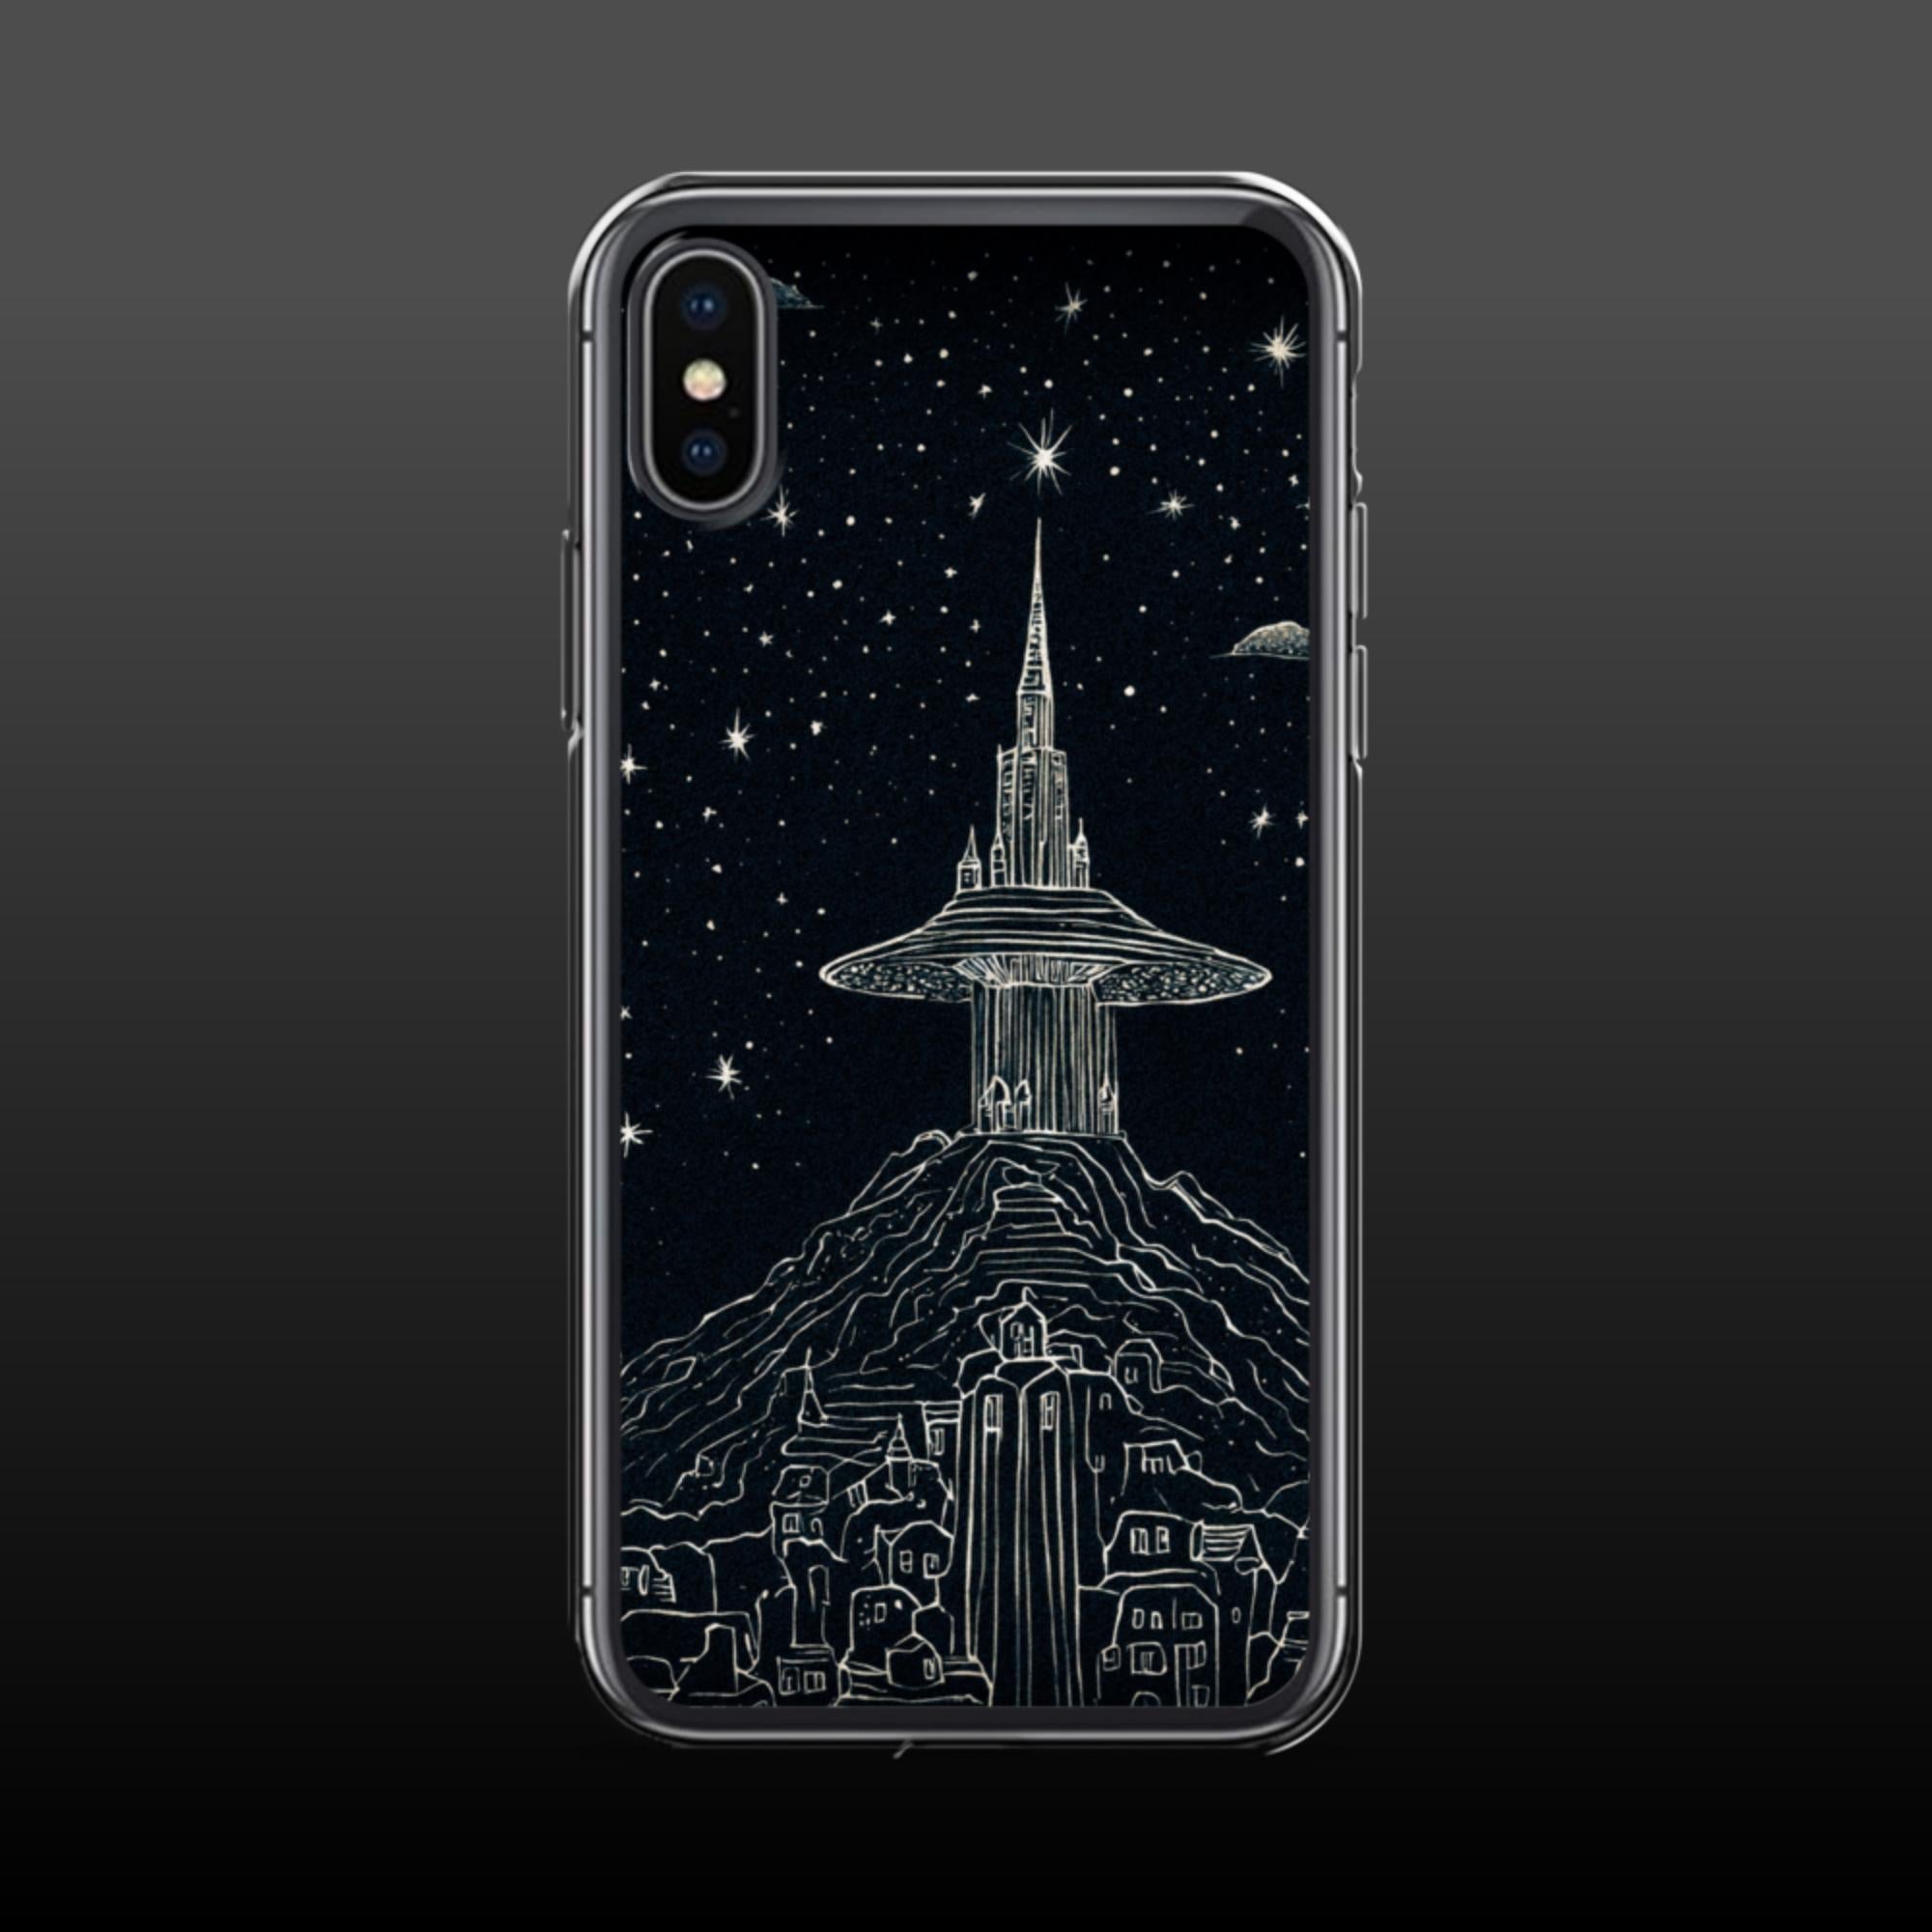 "Stary dream city" clear iphone case - Clear iphone case - Ever colorful